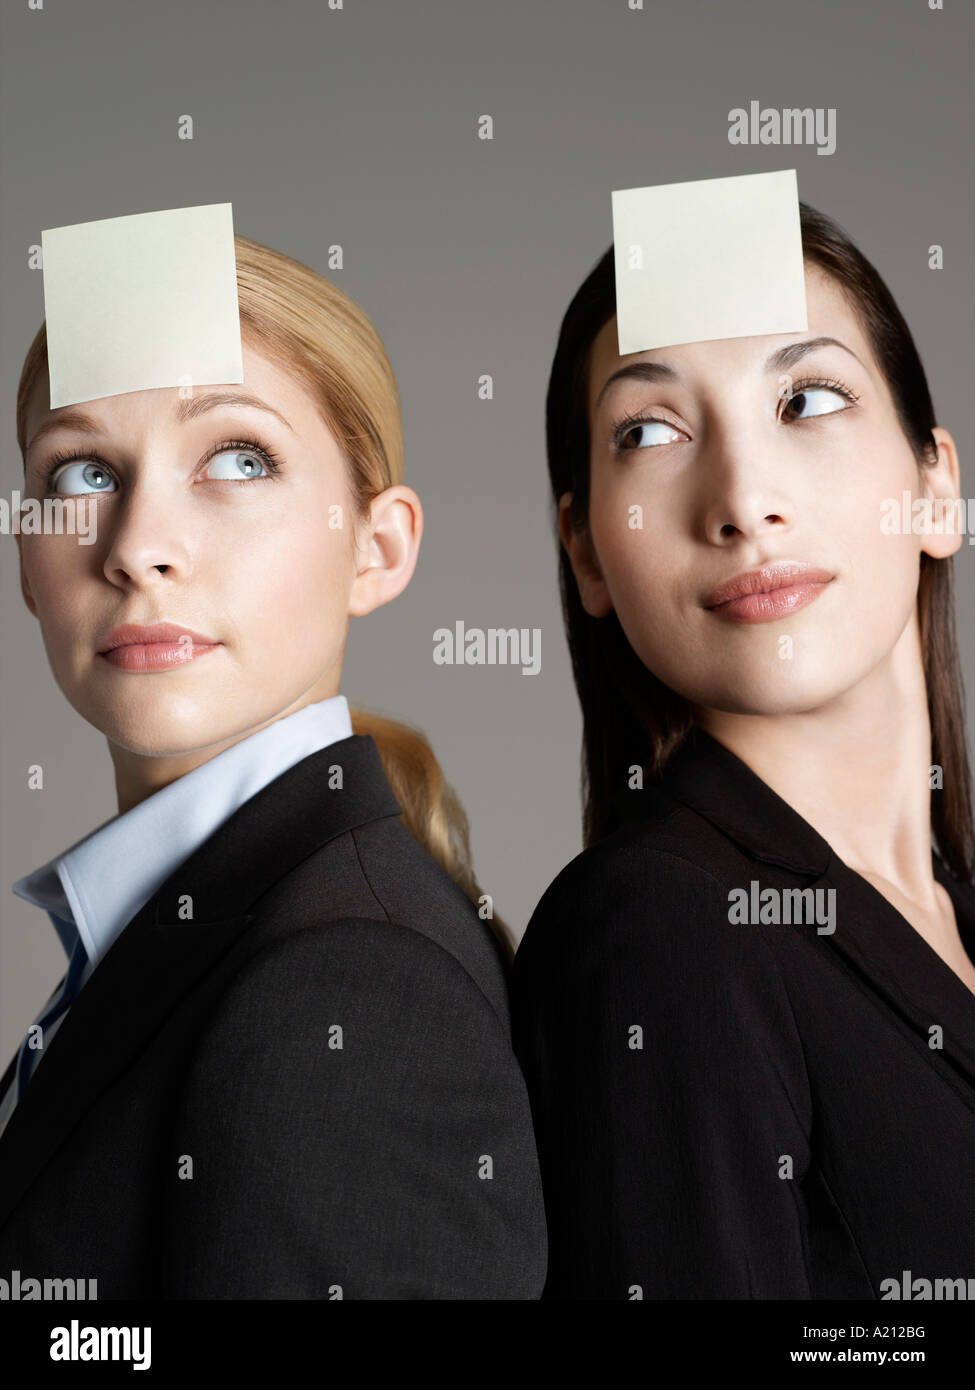 Portrait of two female office workers with sticky notes on forehead Stock Photo